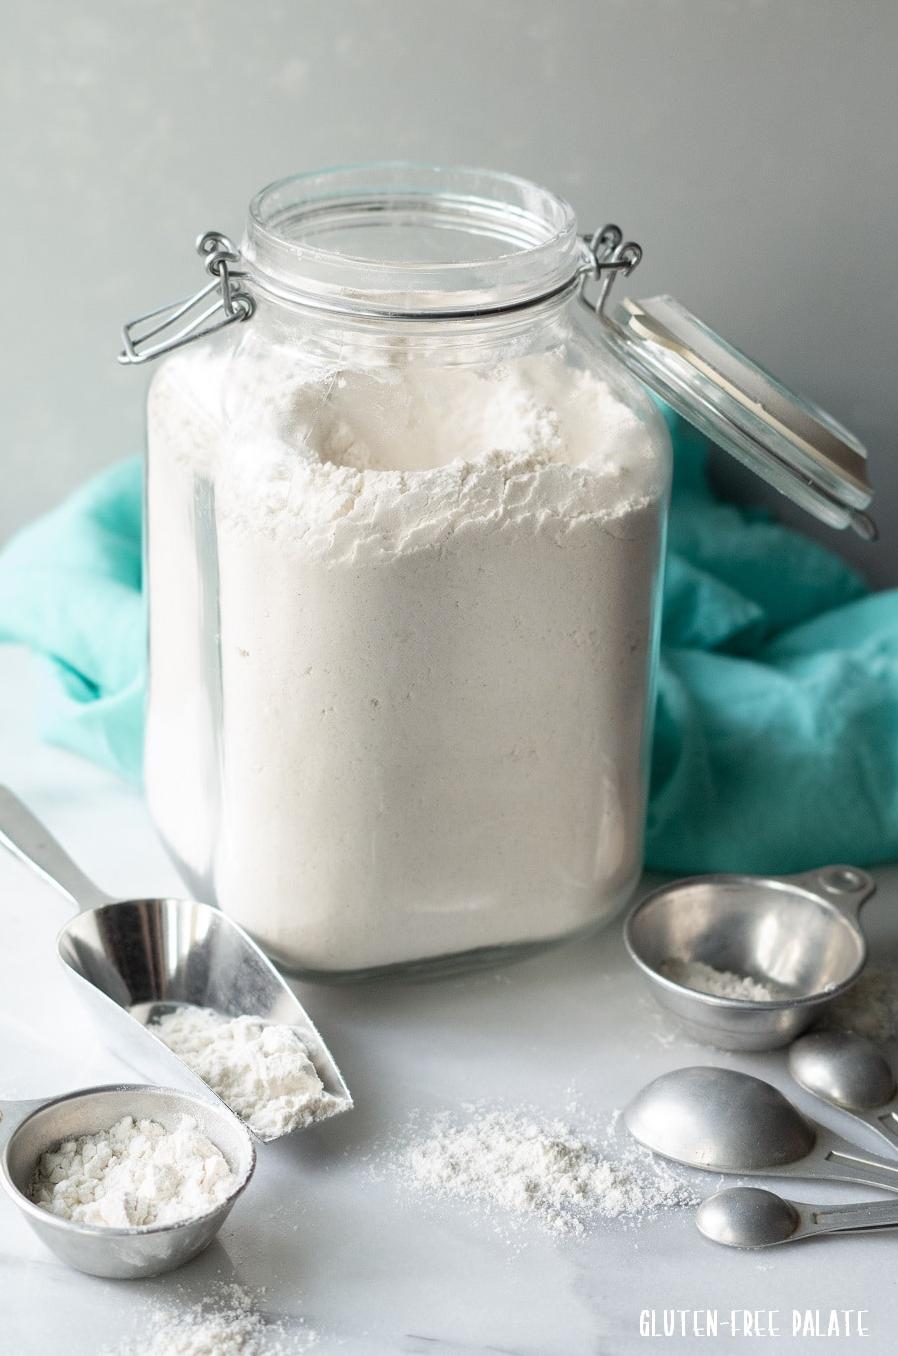  Flour power! This gluten-free flour will make all your baking dreams come true.